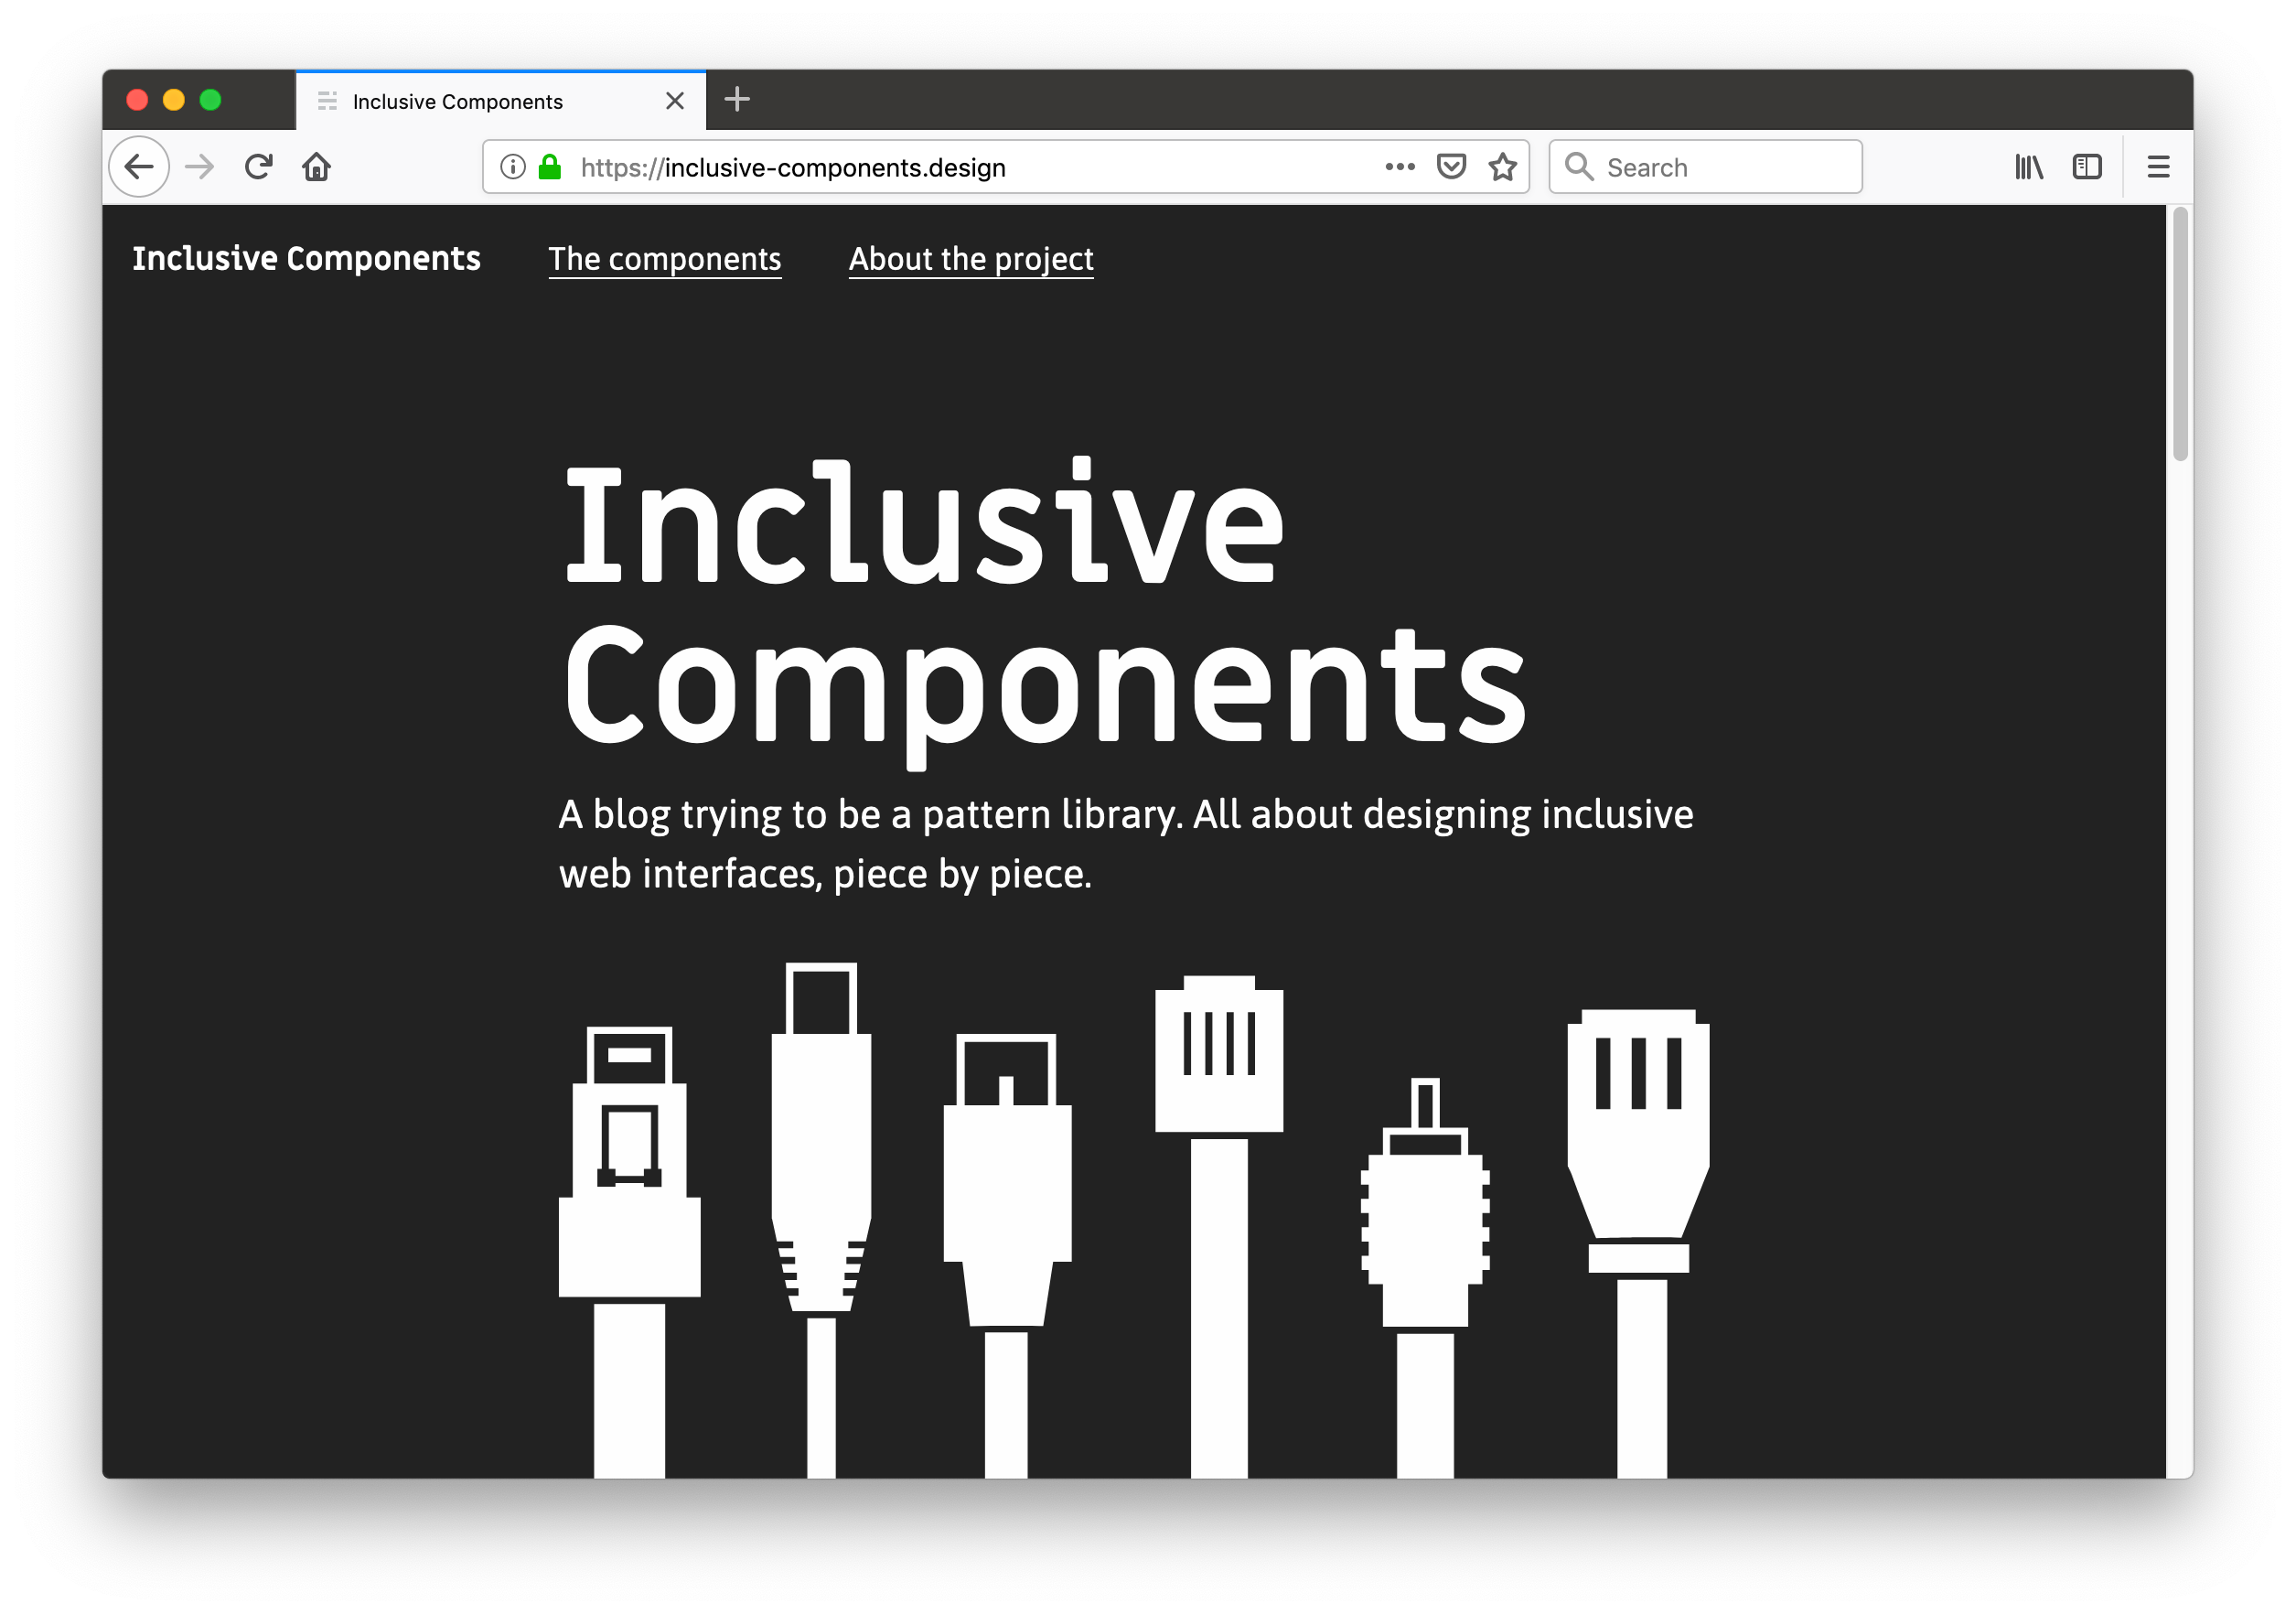 Inclusive components by Heydon Pickering.